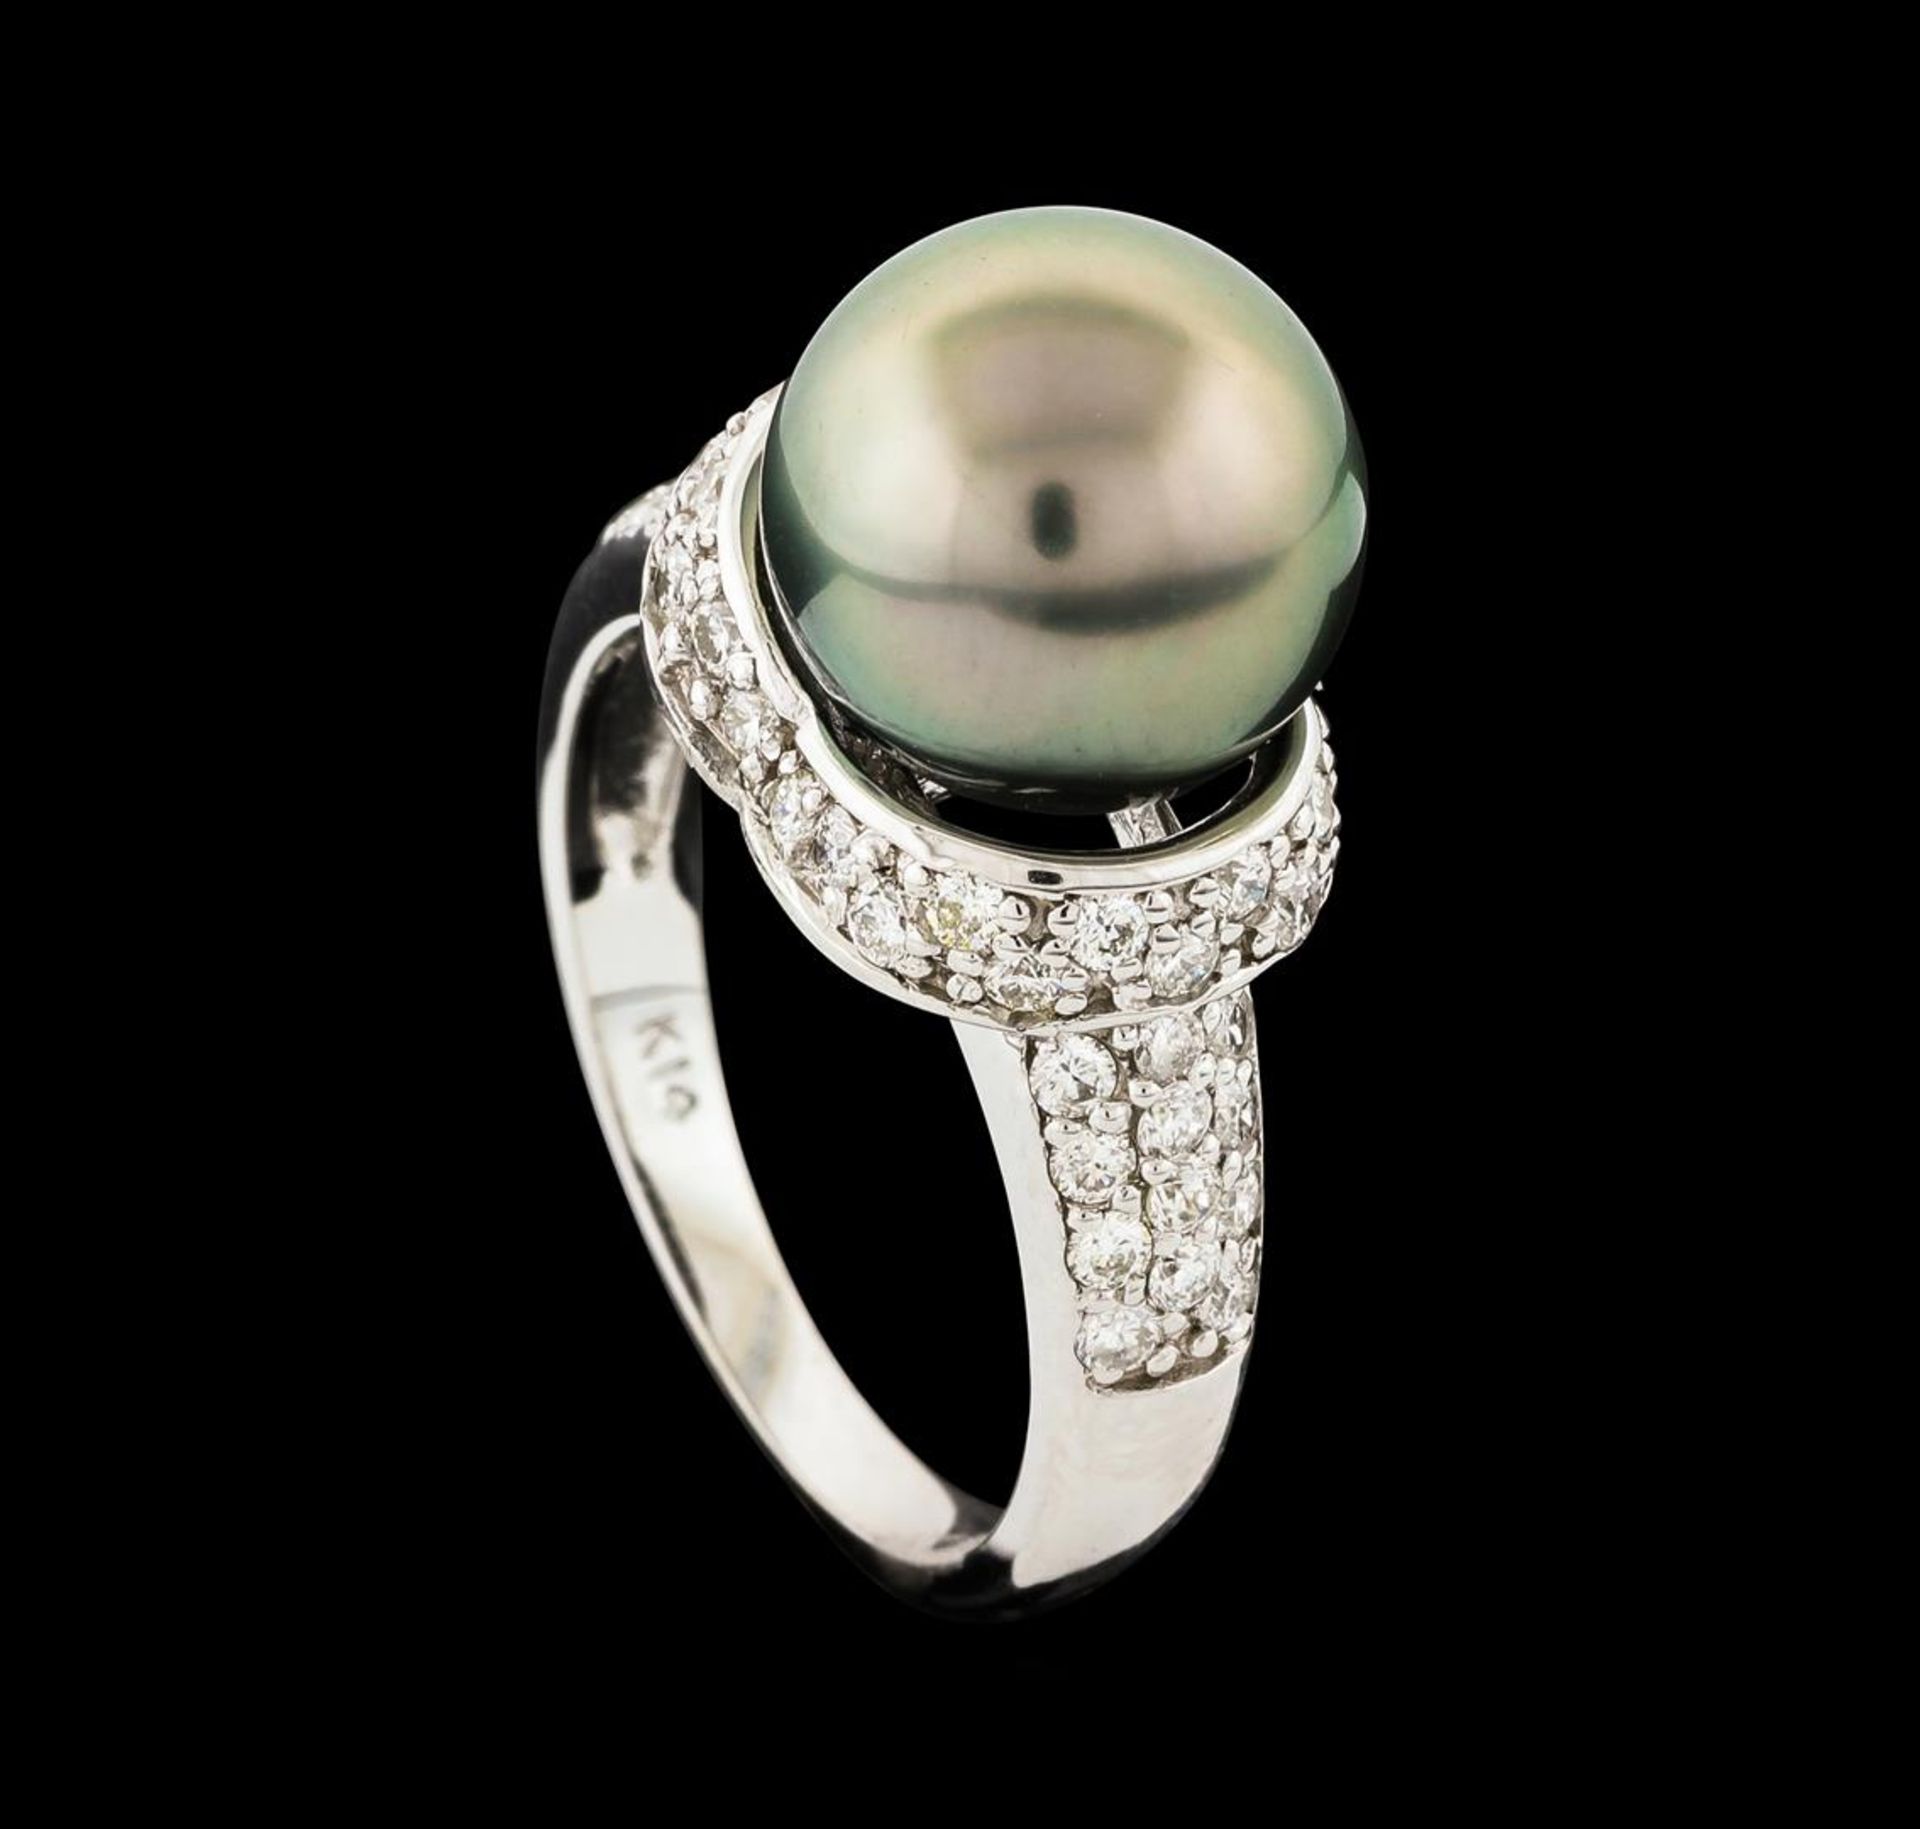 Pearl and Diamond Ring - 14KT White Gold - Image 4 of 4